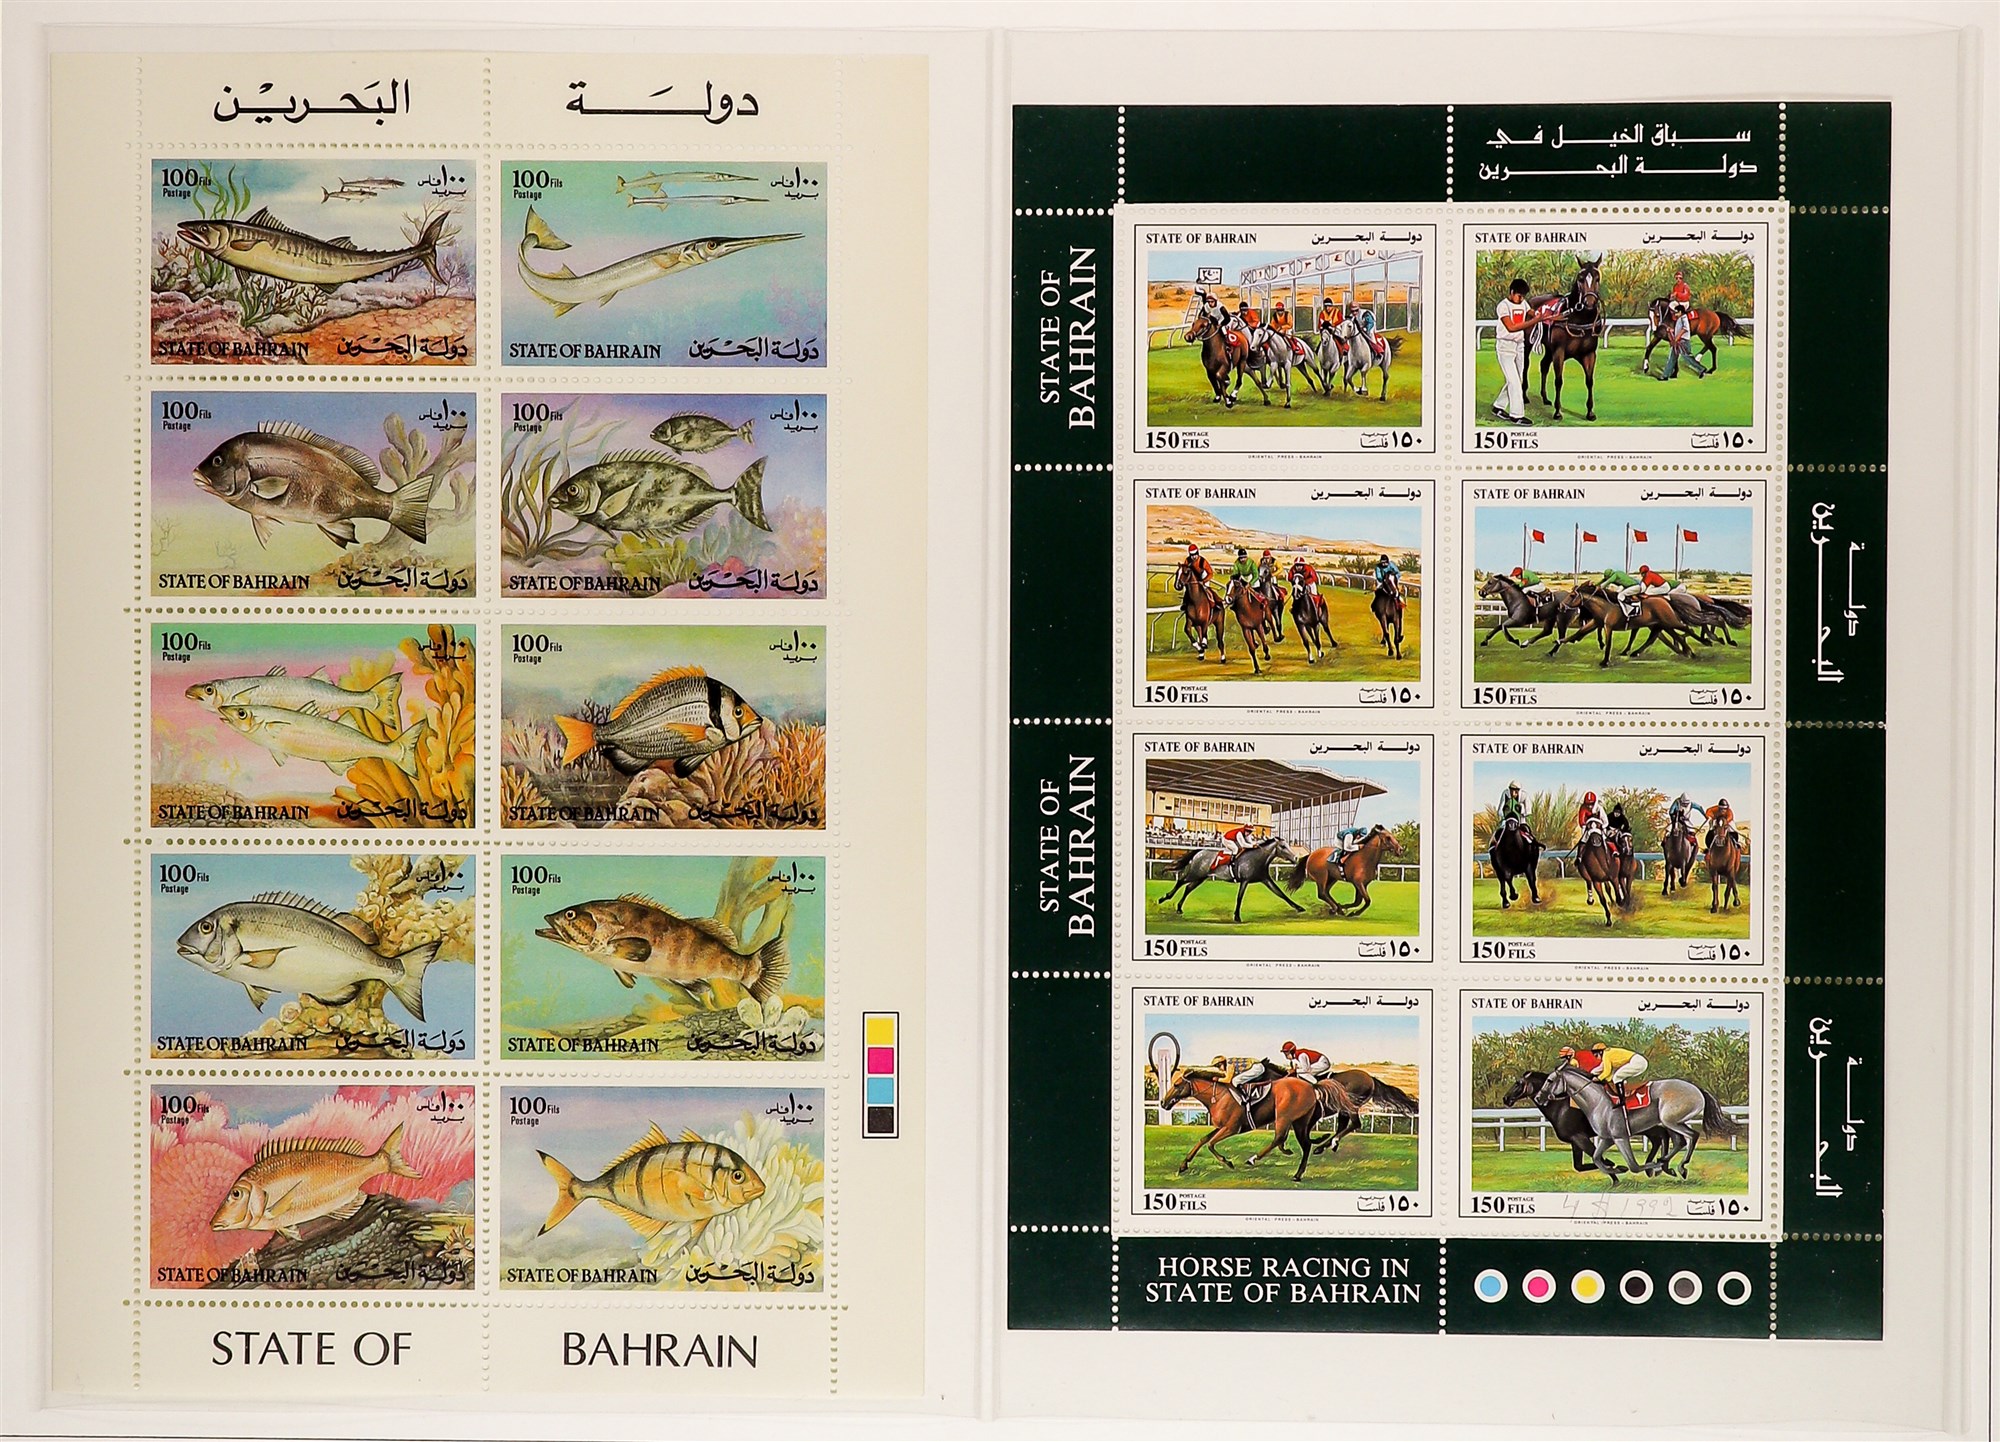 BAHRAIN 1966 - 1998 NEVER HINGED MINT COLLECTION of sets in album with slipcase, note 1966 set of - Image 5 of 16